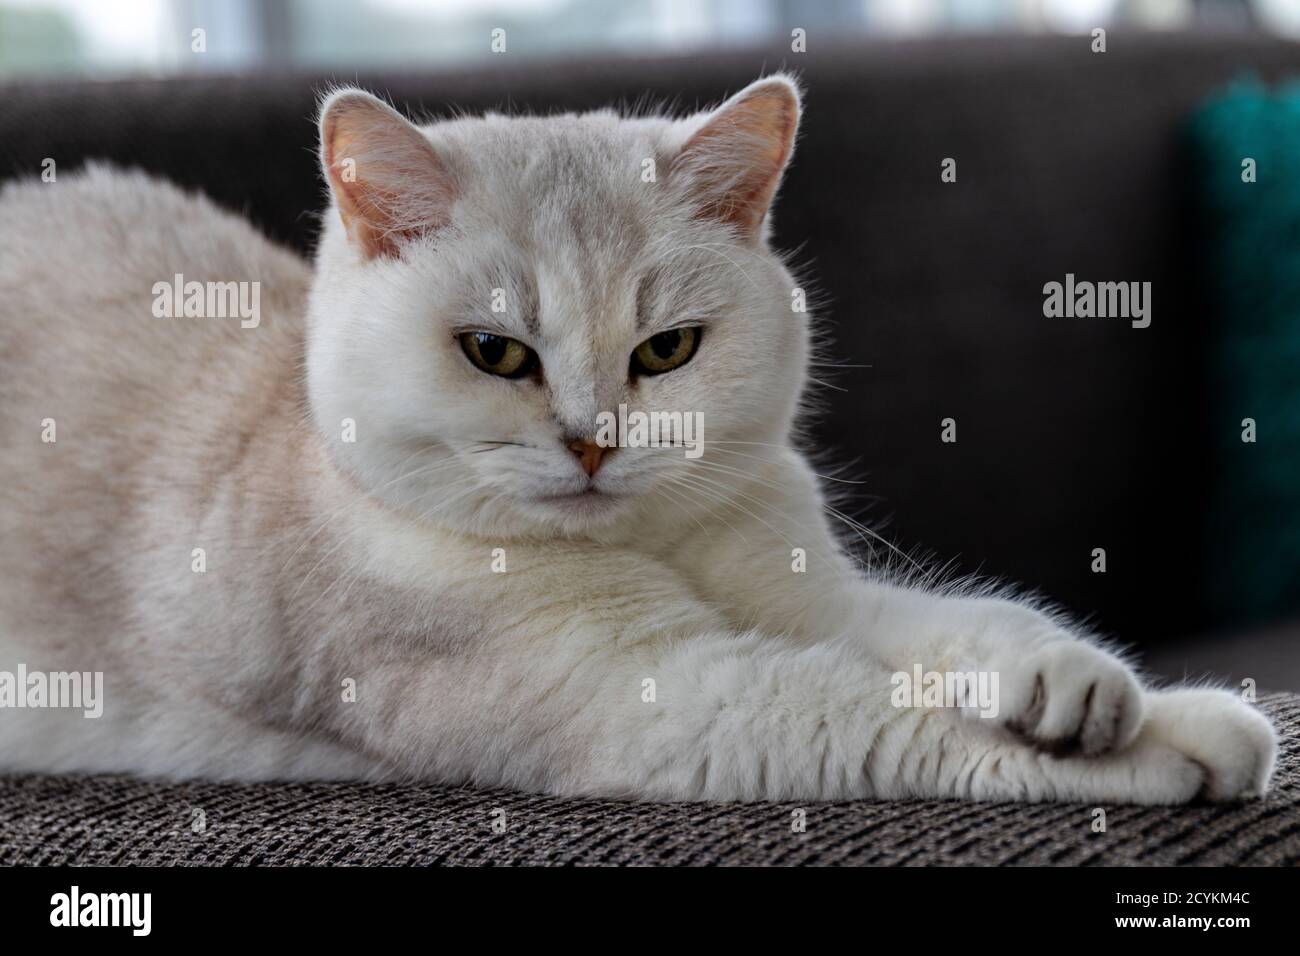 Close-up cat, british shorthair silver shaded sitting on a couch. Stock Photo